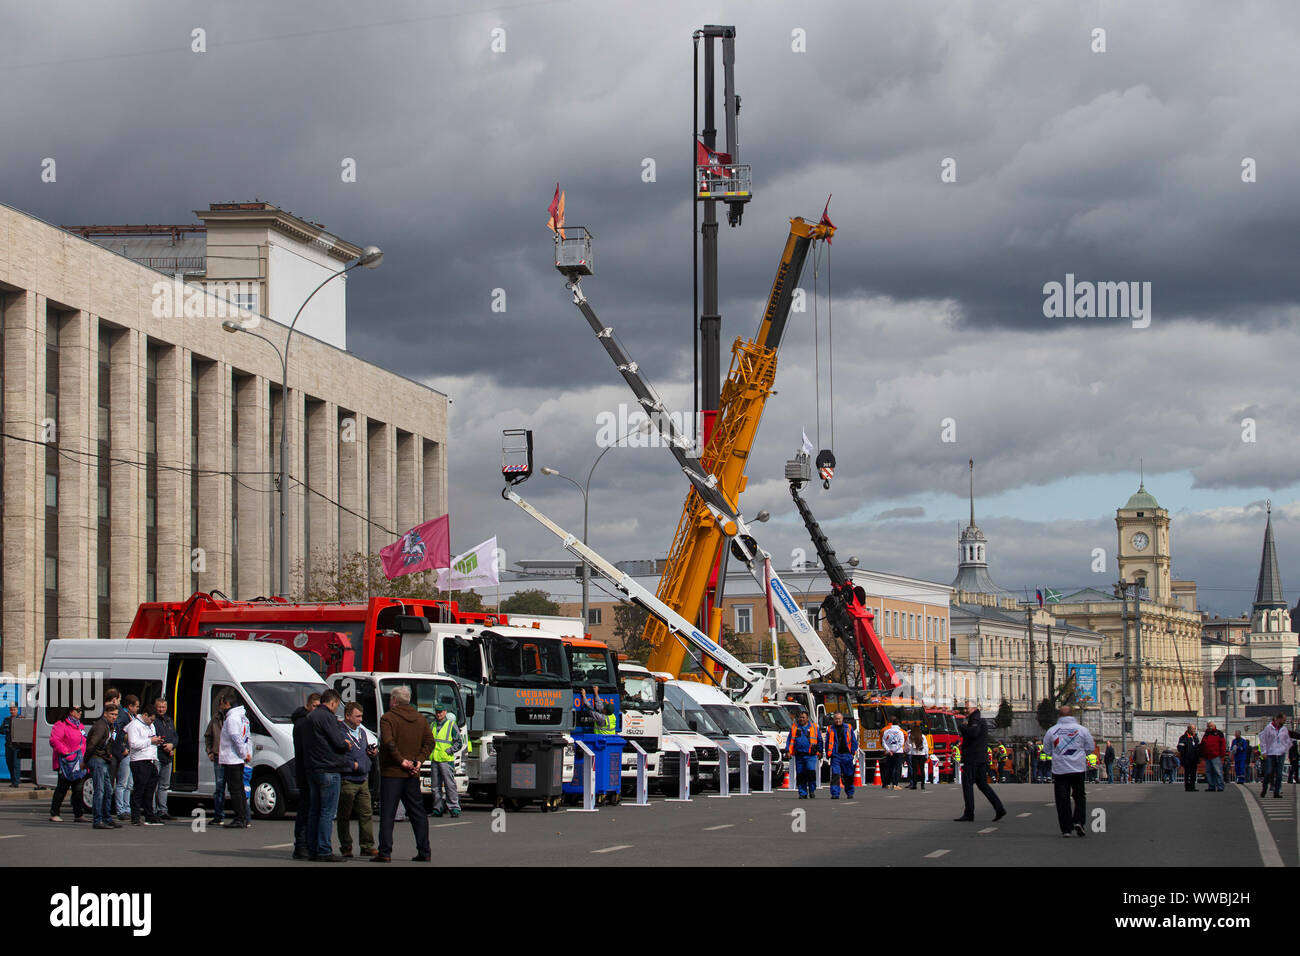 Moscow, Russia. 14th Sep, 2019. Municipal service vehicles are seen on display in central Moscow, Russia, on Sept. 14, 2019. About 700 vehicles took part in the Municipal Service Vehicle Parade on Saturday. Credit: Alexander Zemlianichenko Jr/Xinhua Stock Photo